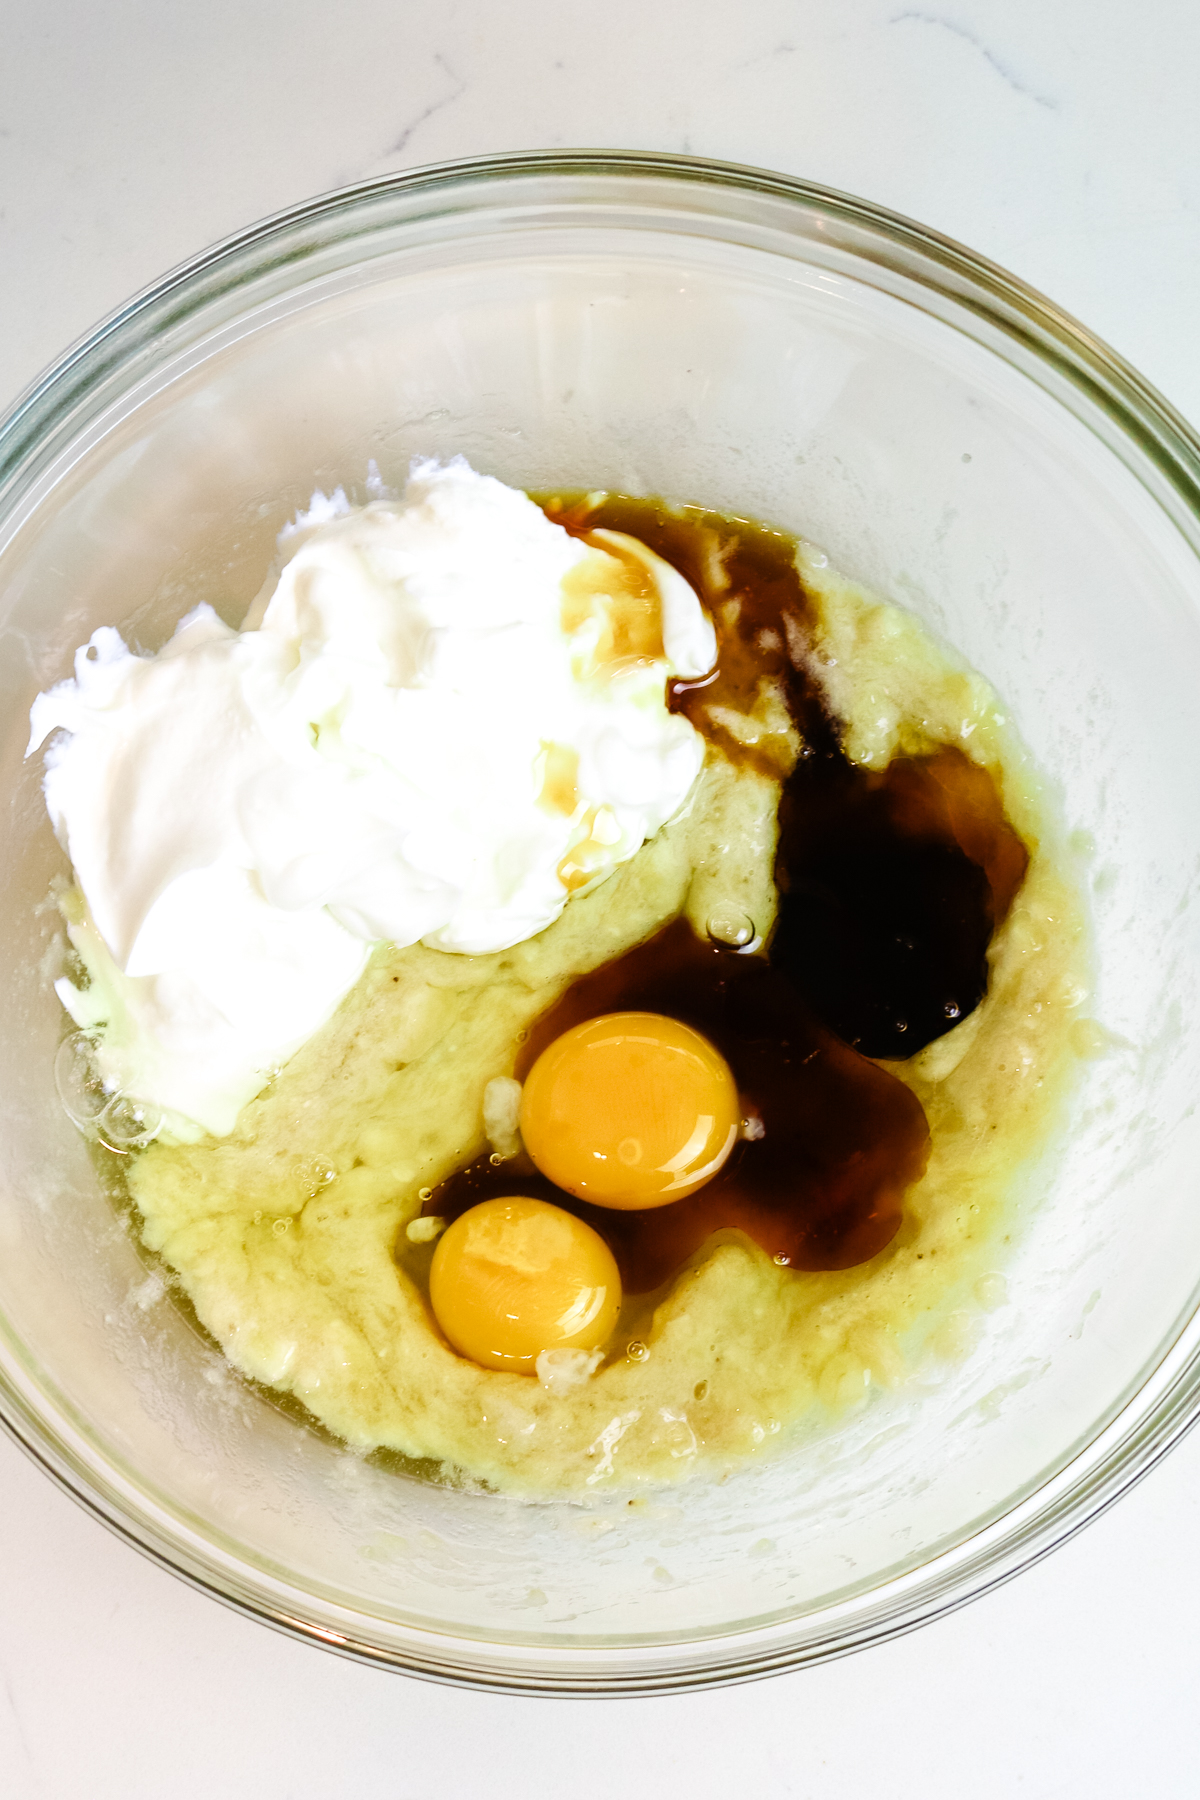 wet ingredients in a large mixing bowl including mashed bananas, protein, eggs, and vanilla.